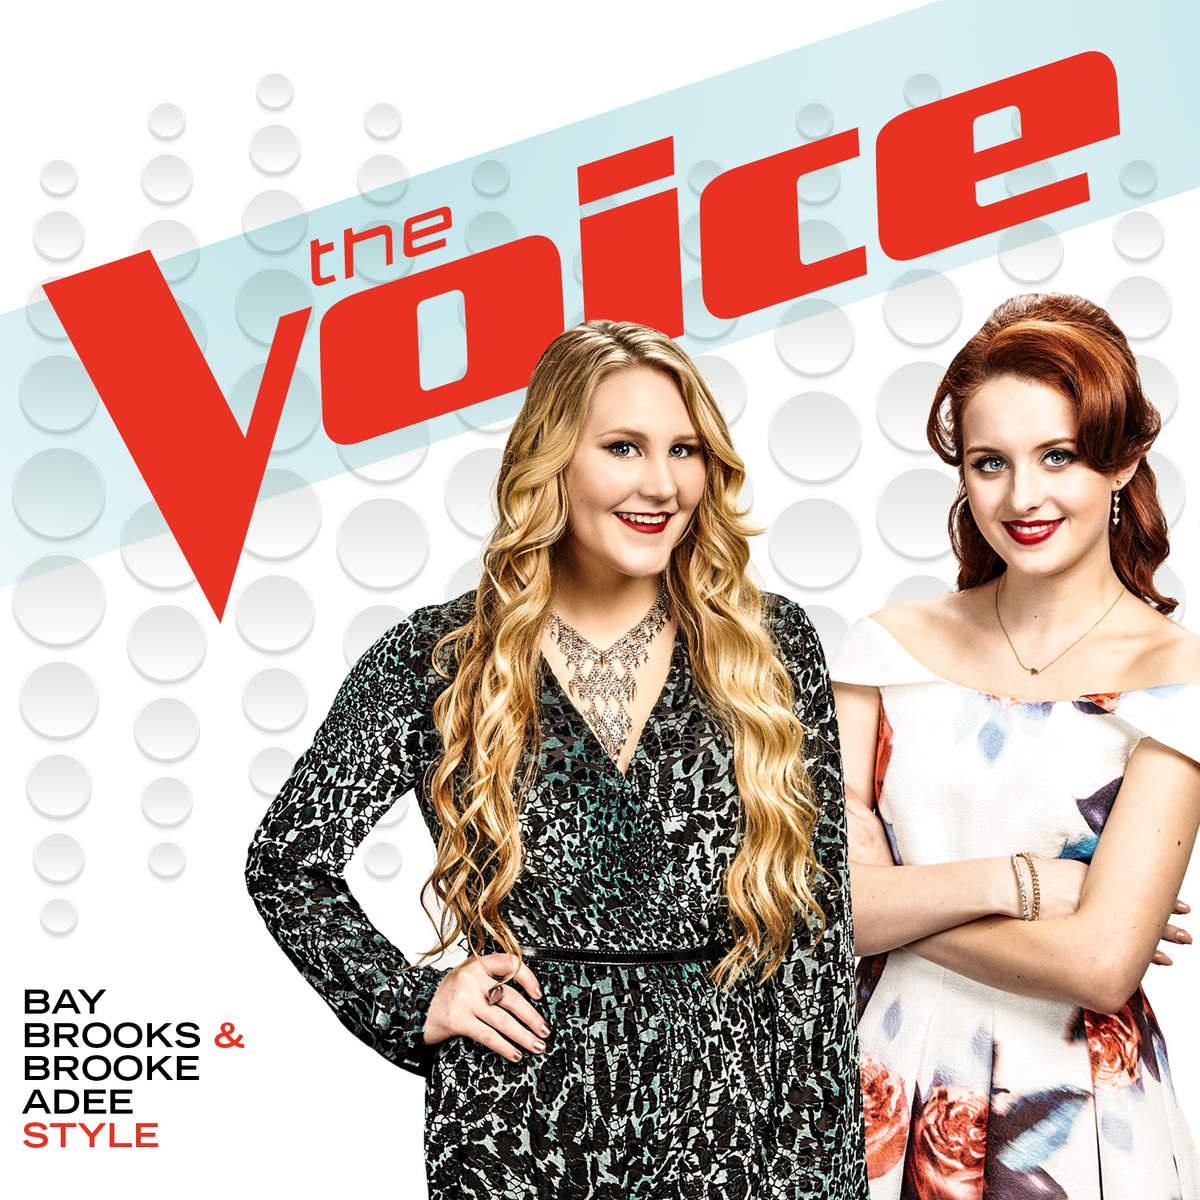 Brooke Adee - Style (The Voice Performance)